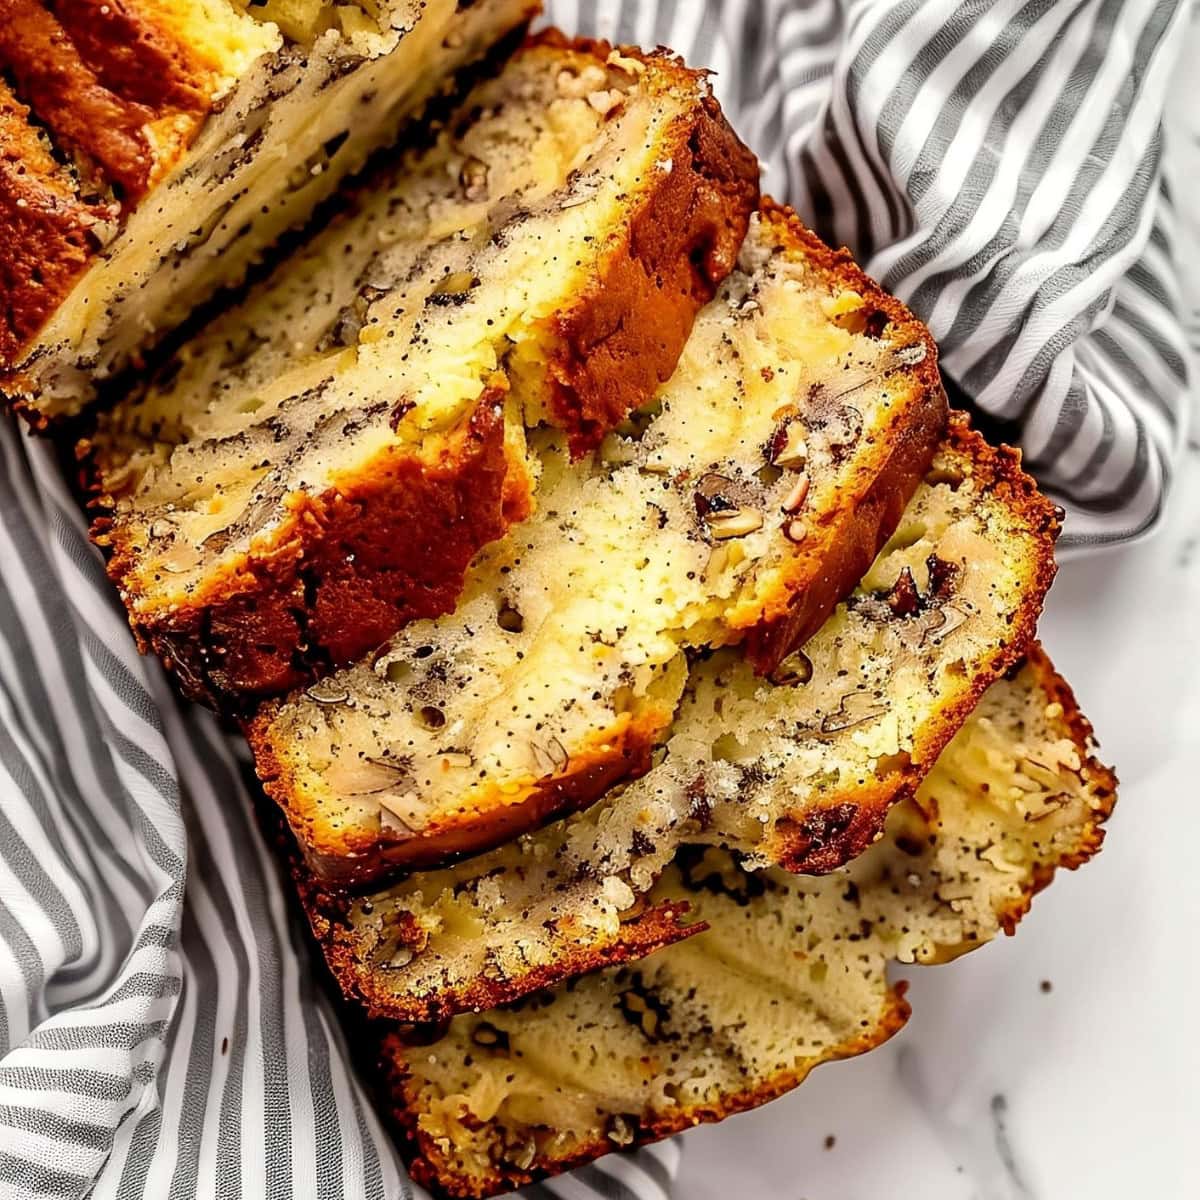 Top Close View of Slices of Slices of Cake Mix Banana Bread on a White Marble Table